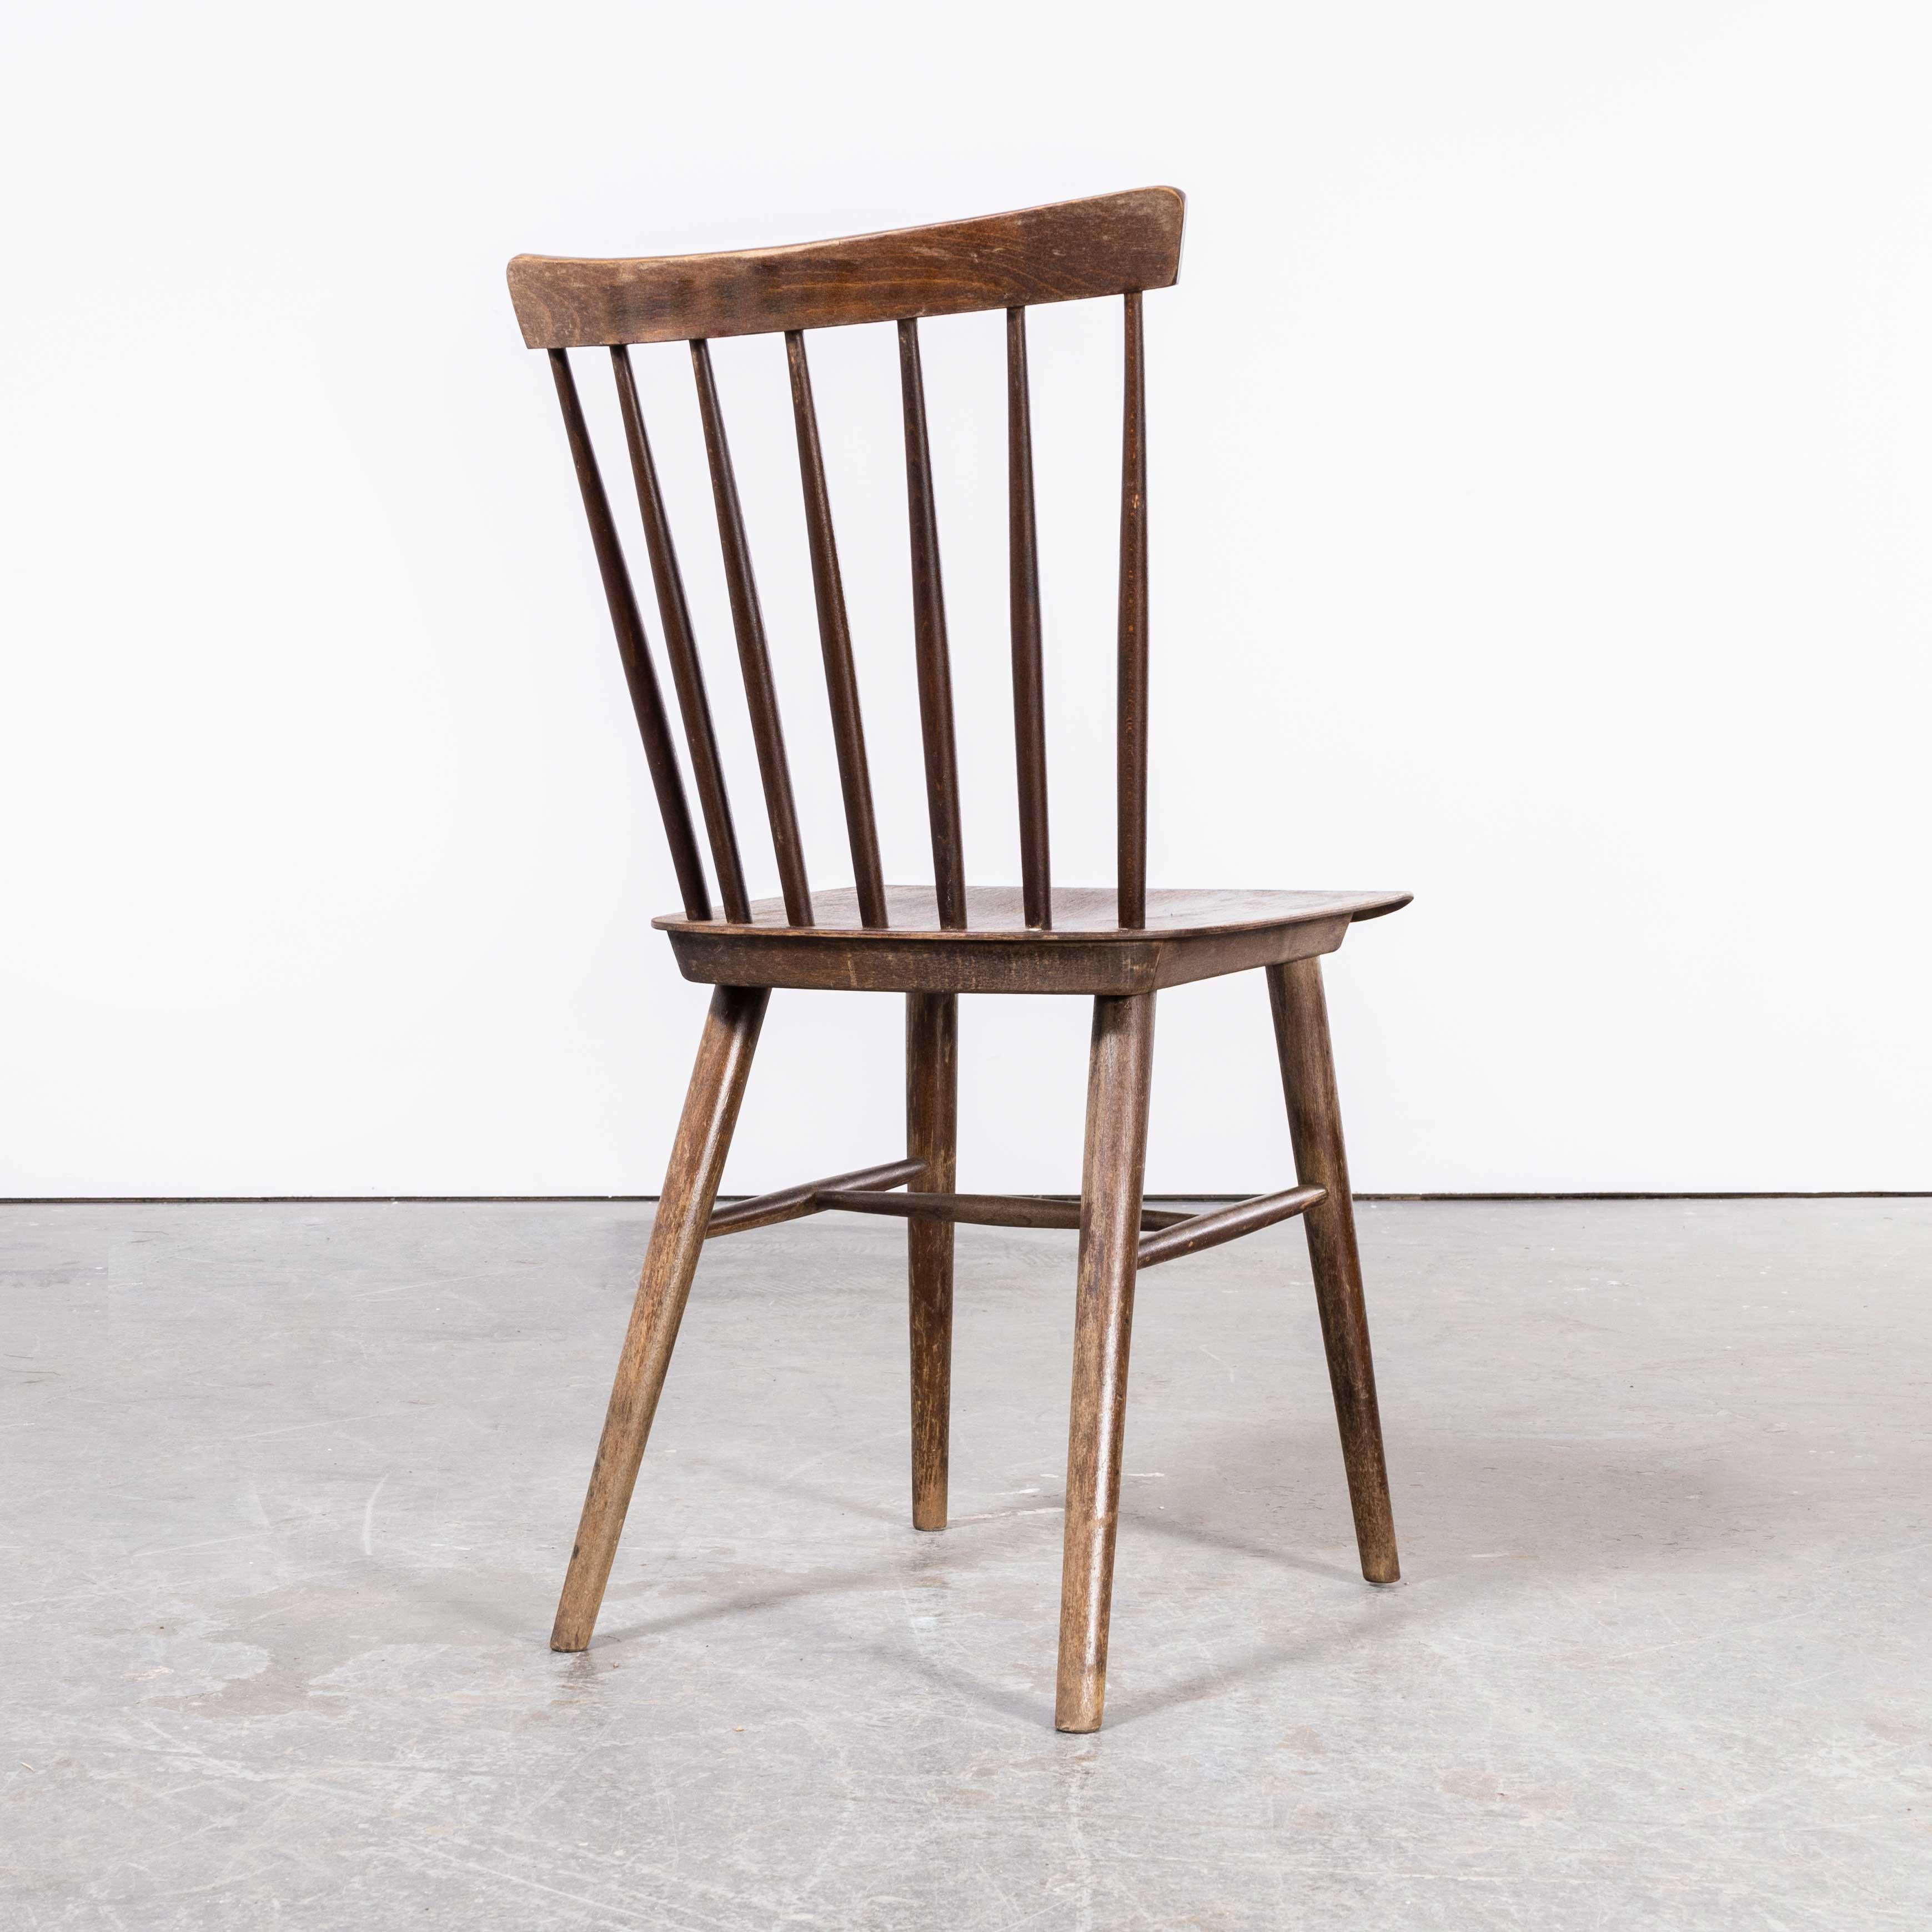 1950’s Dark Walnut Stickback Chairs By Ton – Set Of Six
1950’s Dark Walnut Stick back Chairs By Ton – Set Of Six. These chairs were produced by the famous Czech firm Ton, a post war spin off from the famous Thonet factory that was carved up and